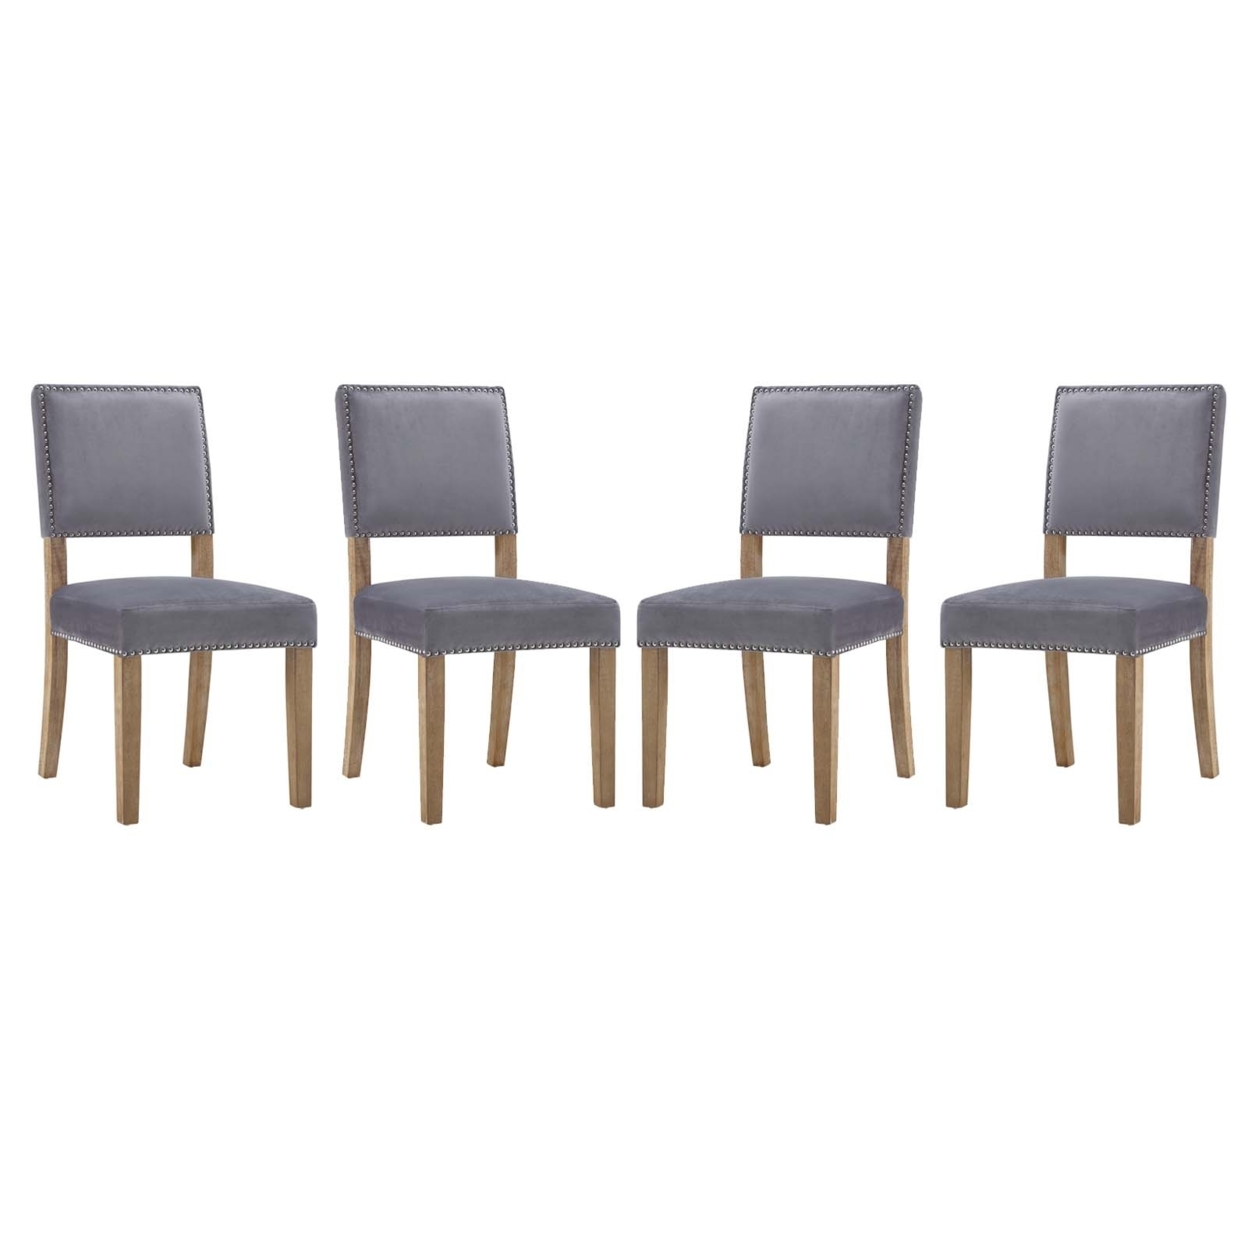 Oblige Dining Chair Wood Set Of 4,Gray